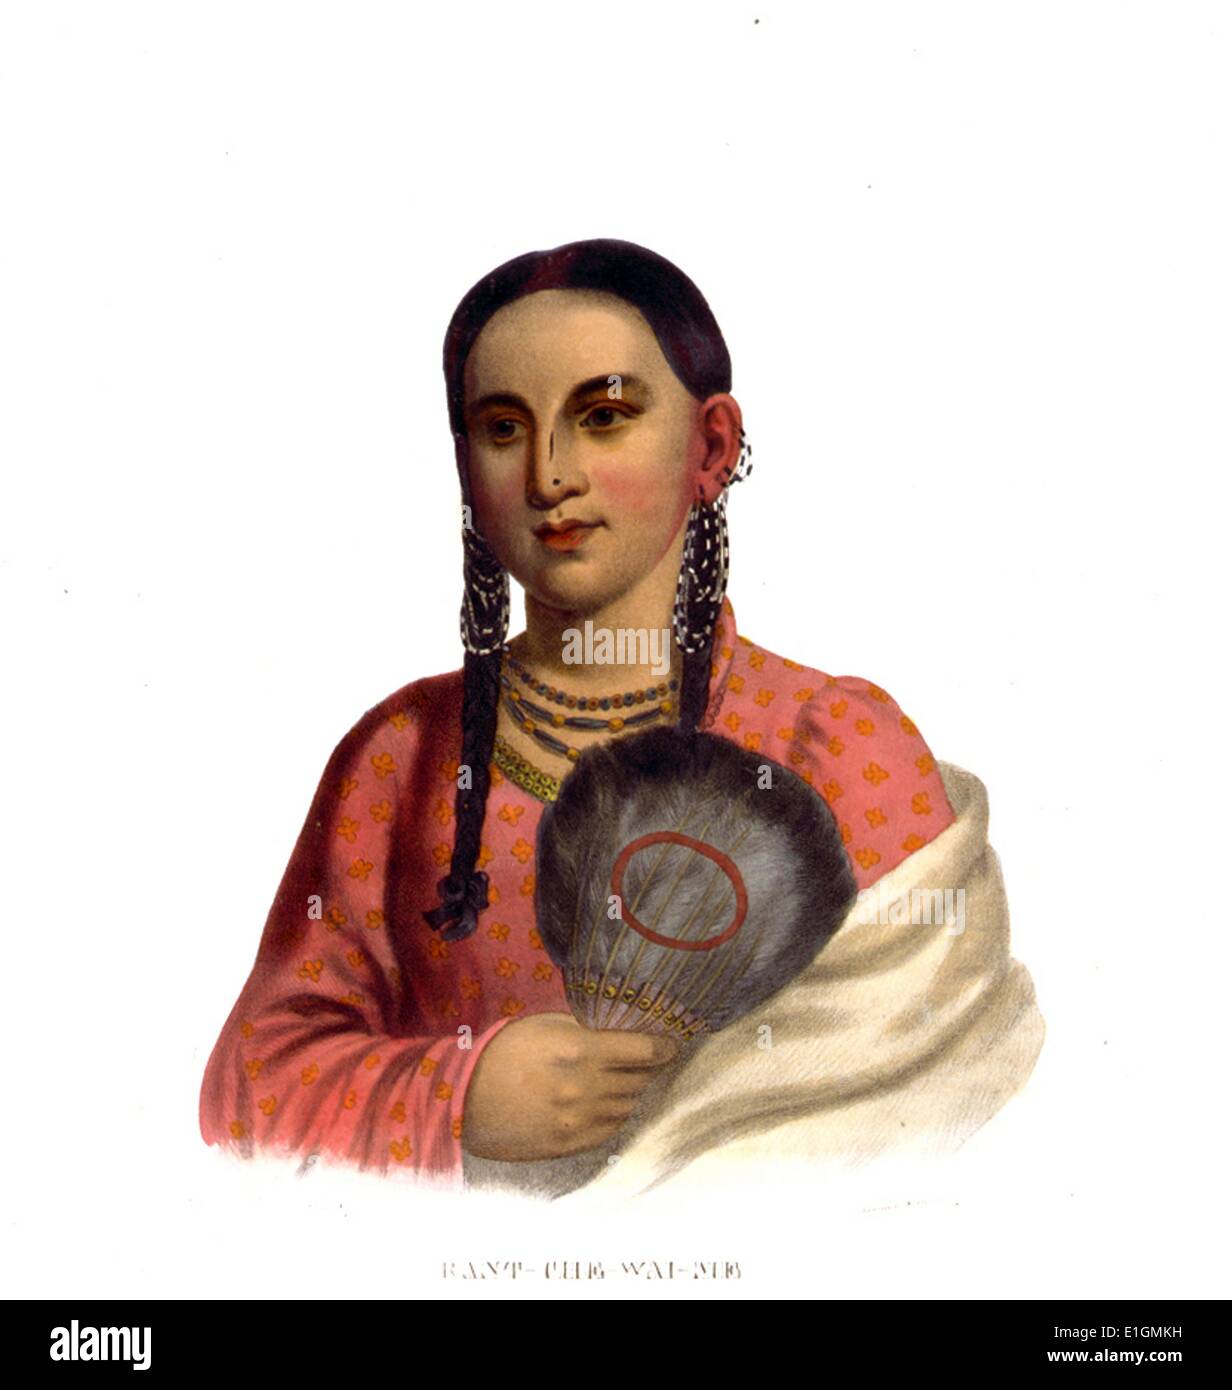 Print shows Rant-Che-Wai-Me, half-length portrait, facing slightly left, holding feather fan. Stock Photo